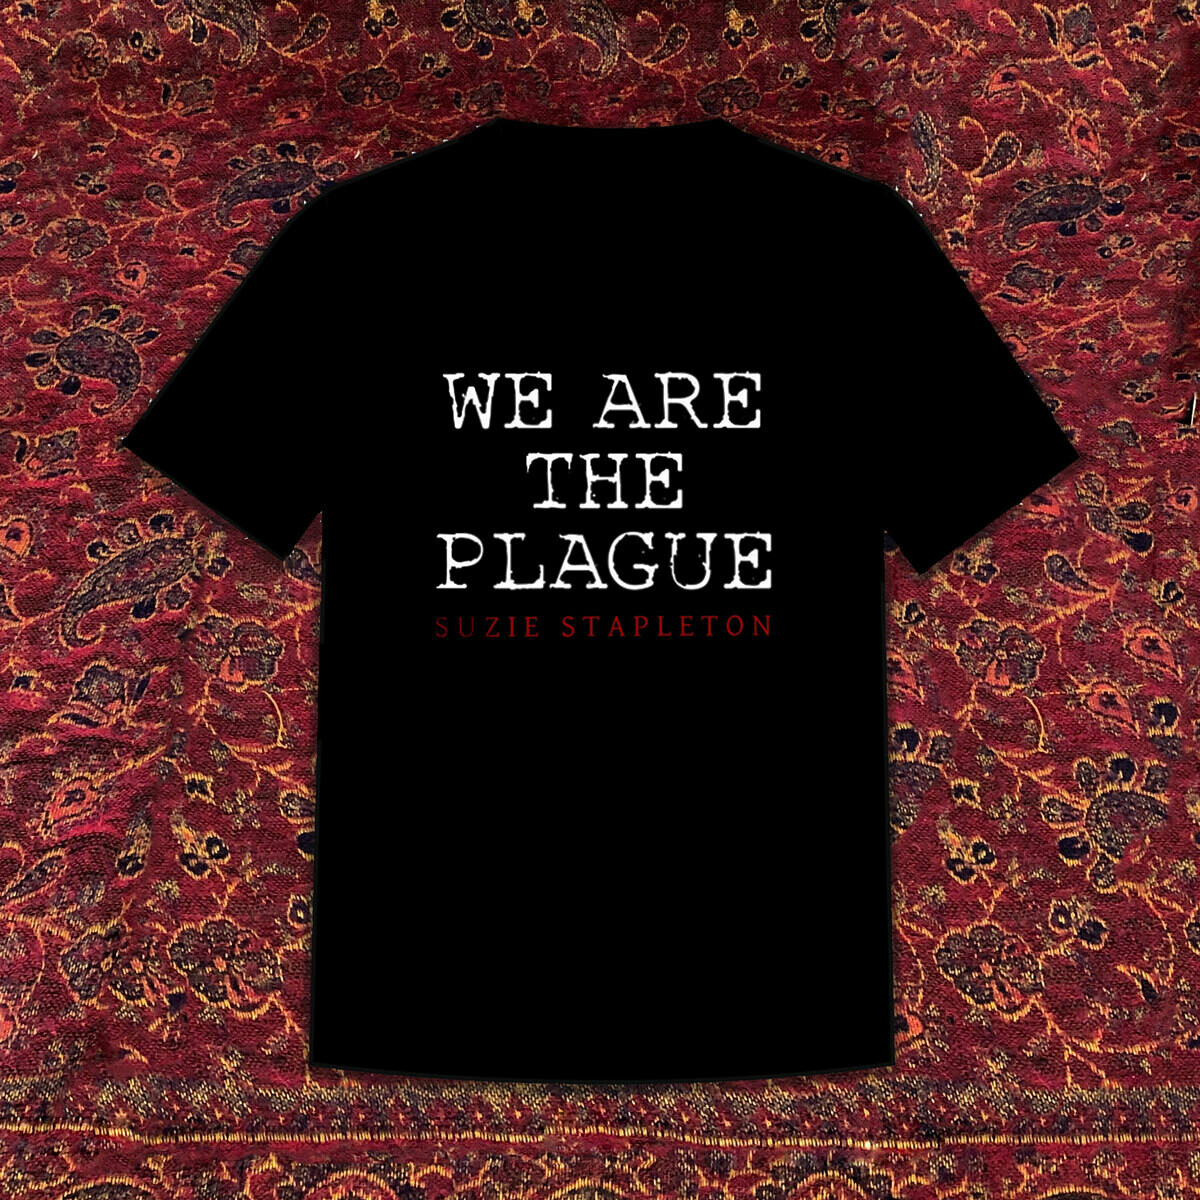 We Are The Plague - T-Shirt
(printed front & back)